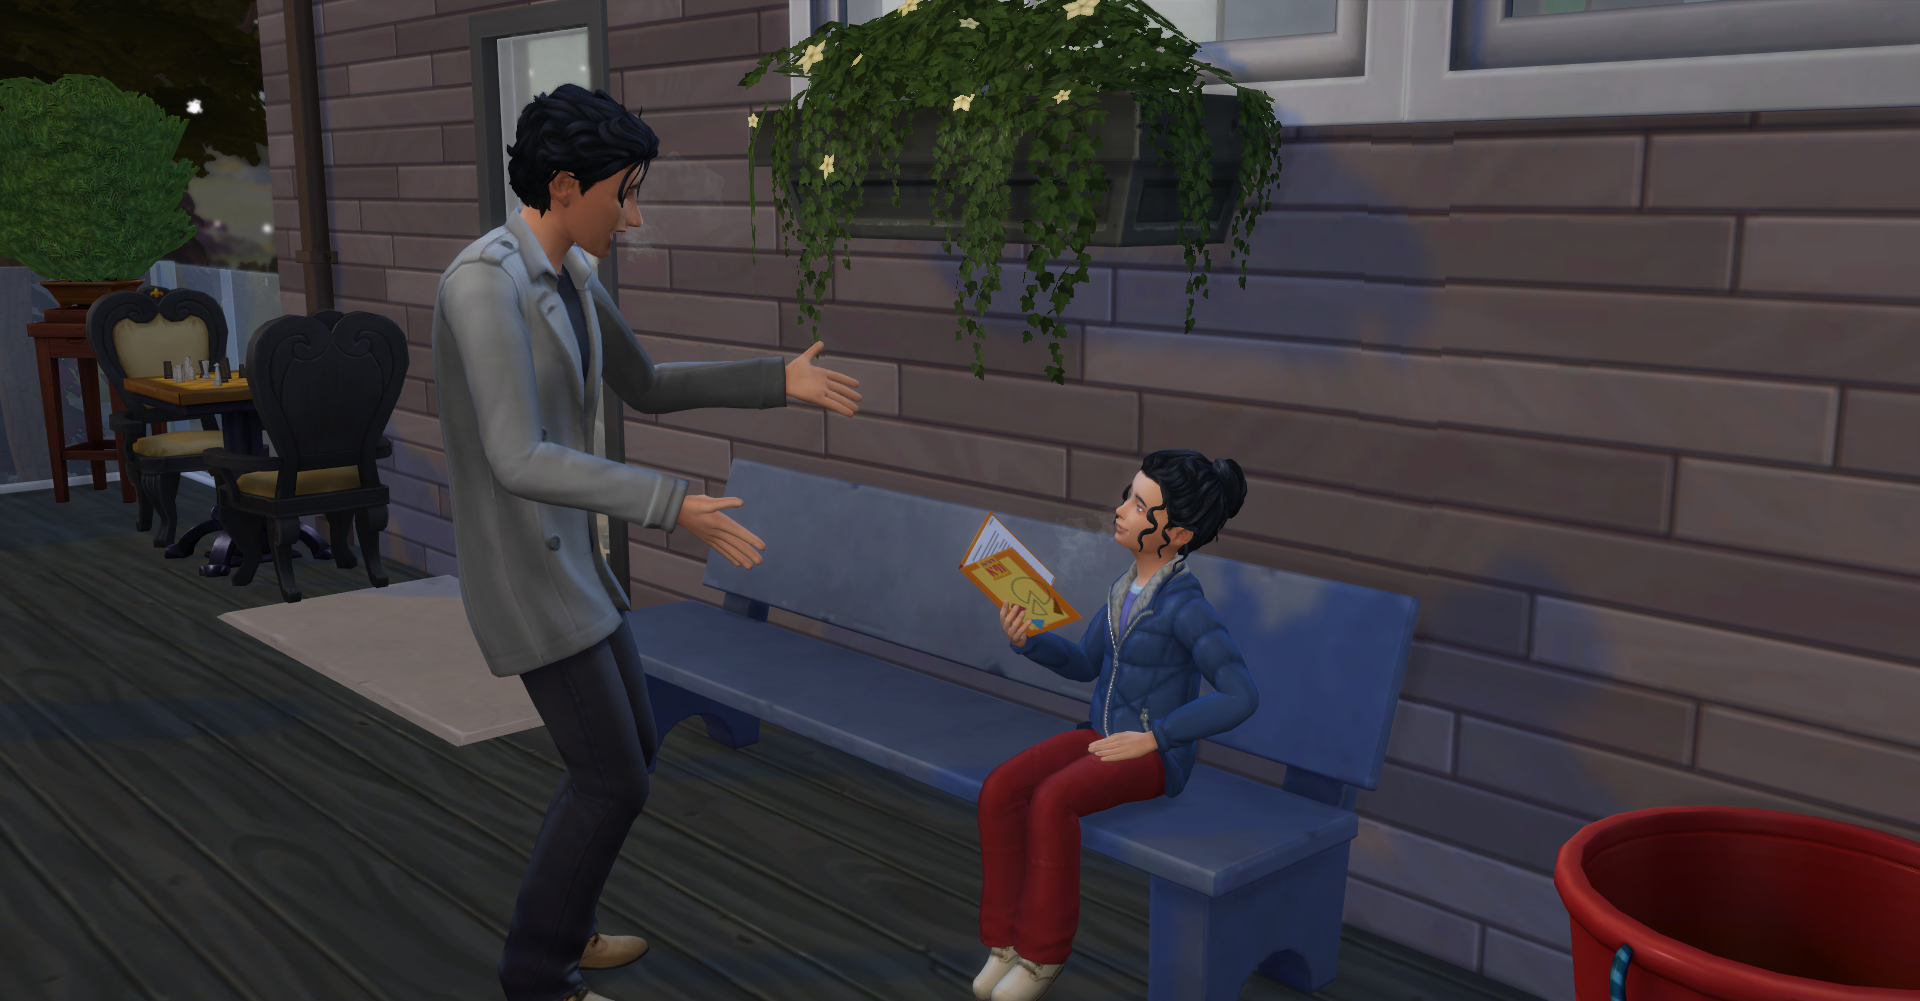 100 baby challenge (masculin) - Page 2 4eqc